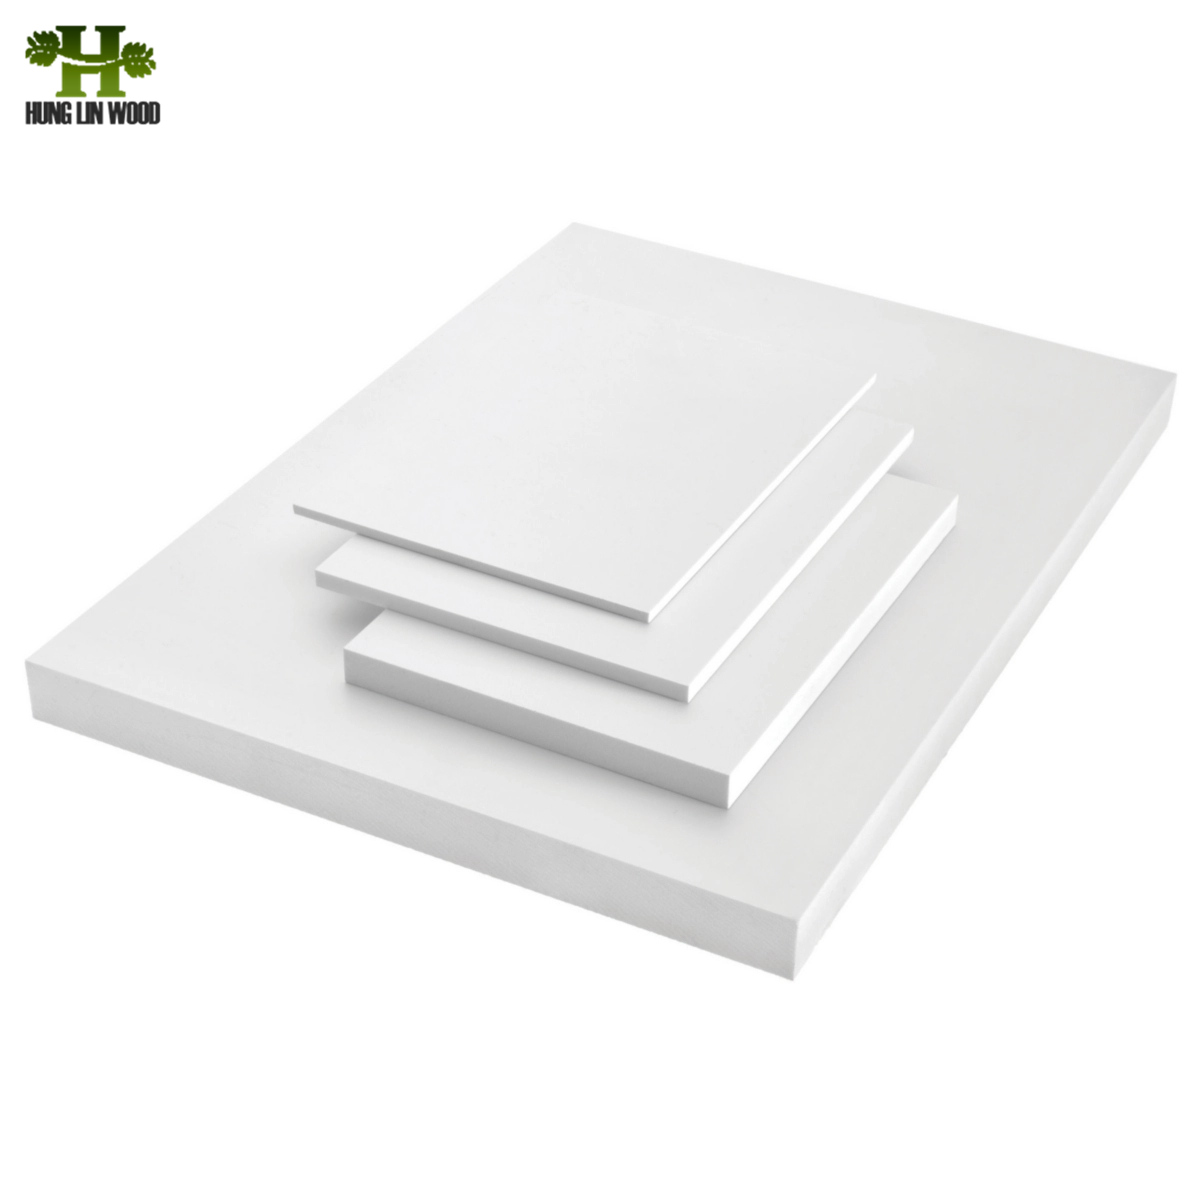 PVC Panels for Interior Ceiling and Wall Decoration with Steady Quality